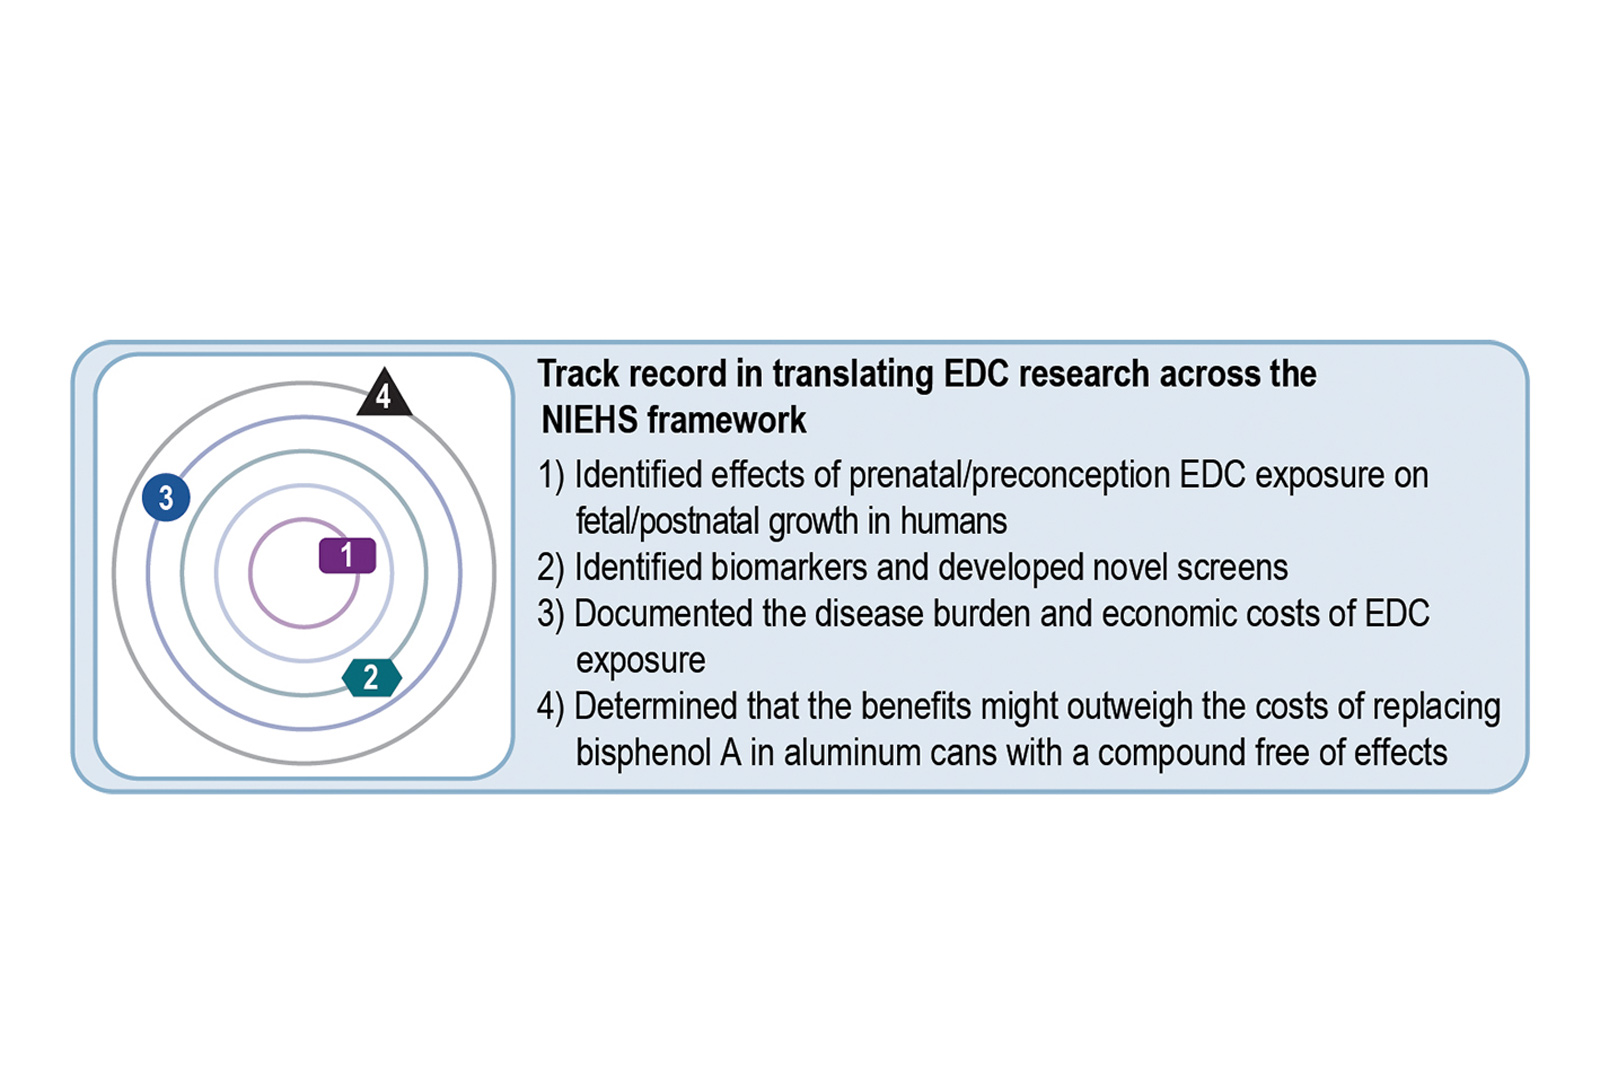 The center translates endocrine-disrupting chemical research across the NIEHS translational research framework from identifying effects of prenatal/postconception EDC exposure on fetal/postnatal growth in humans to determining that the benefits might outweigh the costs of replacing bisphenol A in aluminum cans with a compound free of effects.